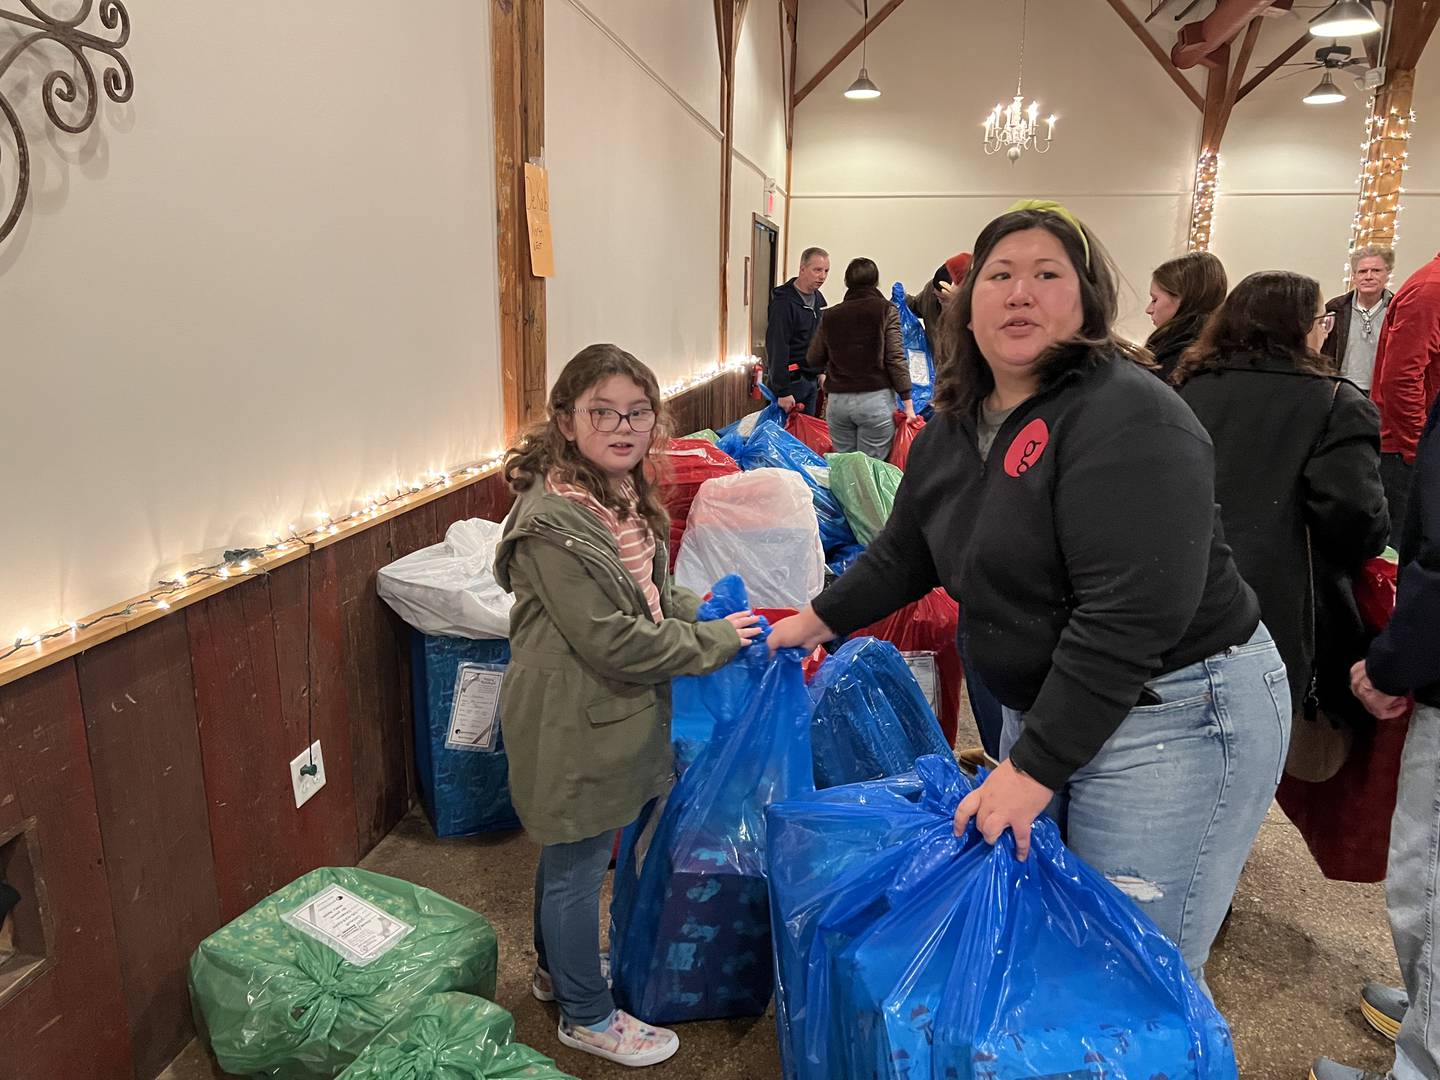 Everly Skudlarek, left, and Kelli Meserole collected gifts at Blumen Gardens on Dec. 24, 2023, to deliver to children in DeKalb as Goodfellows.